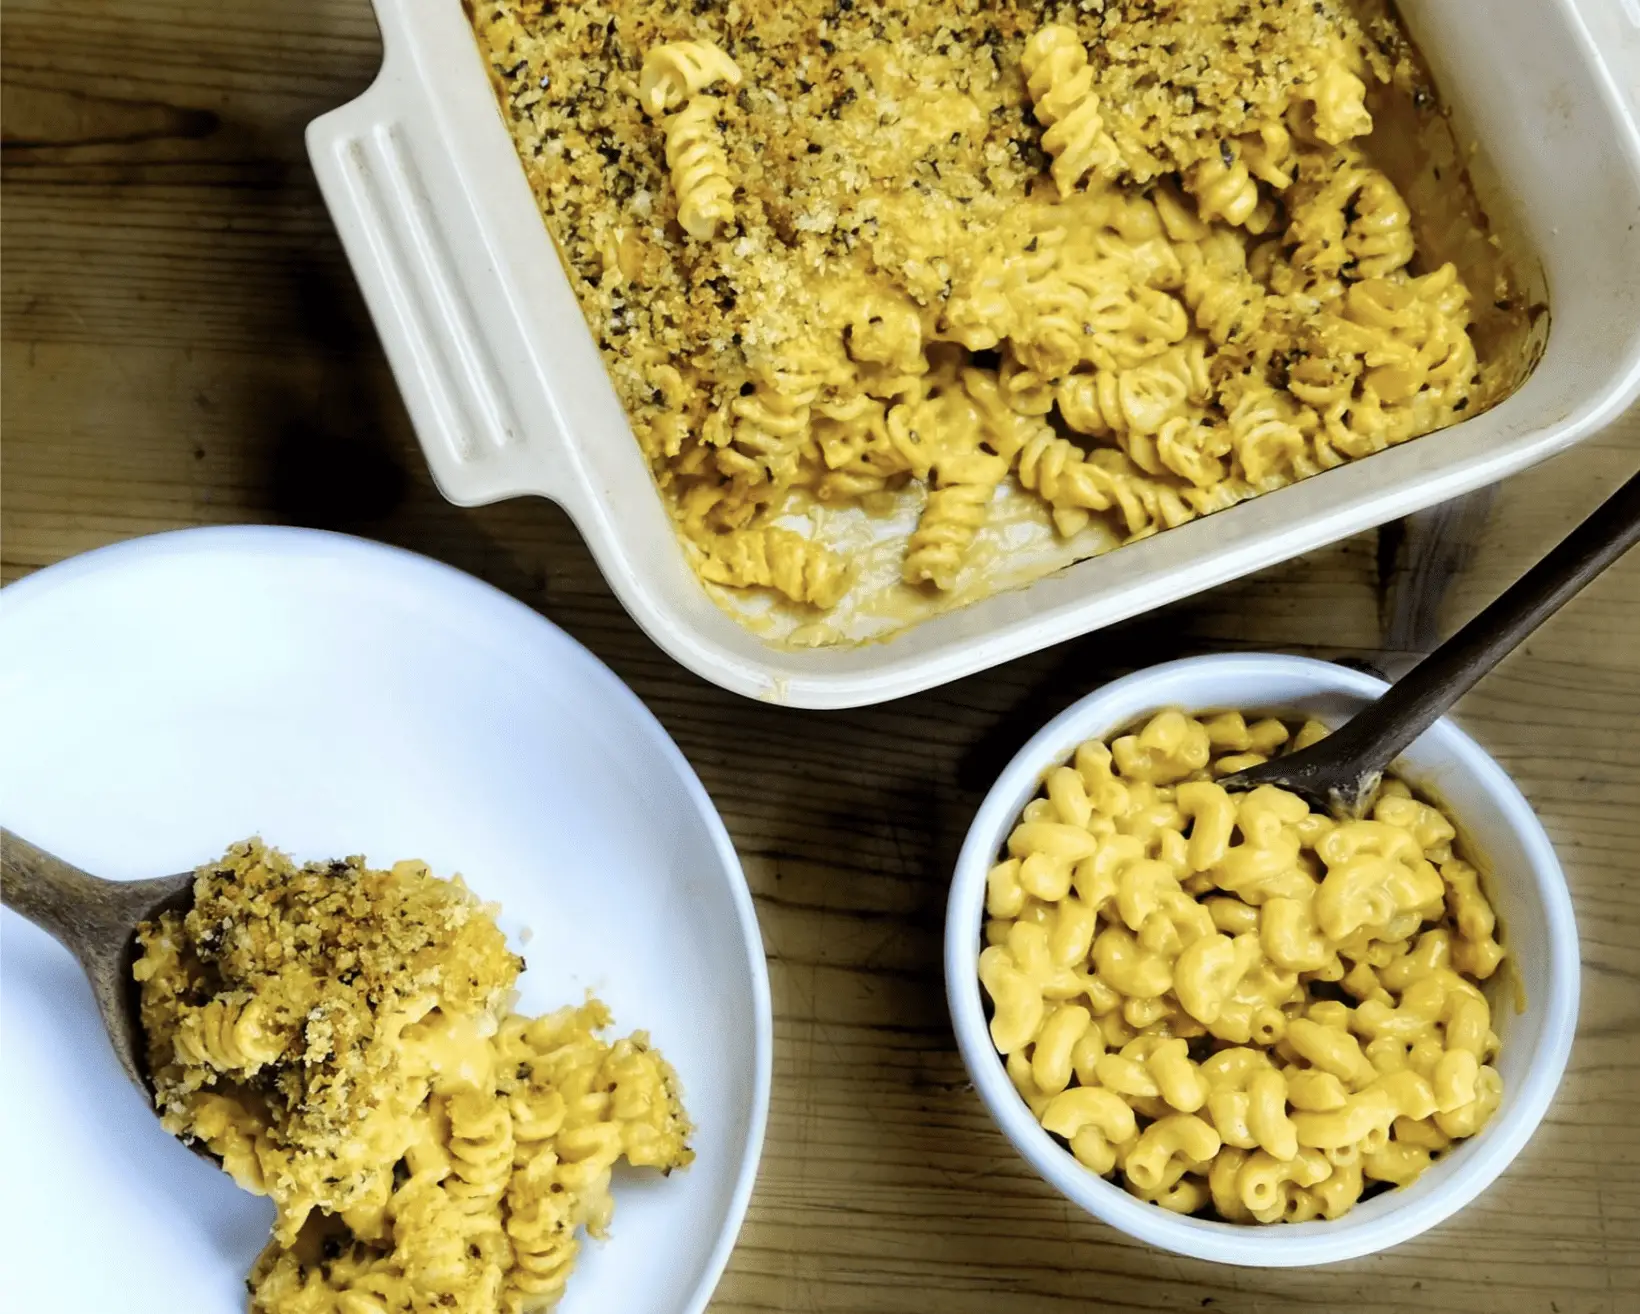 Vegan Mac and Cheese Recipe 2 Ways! Baked and Quick Stove Top